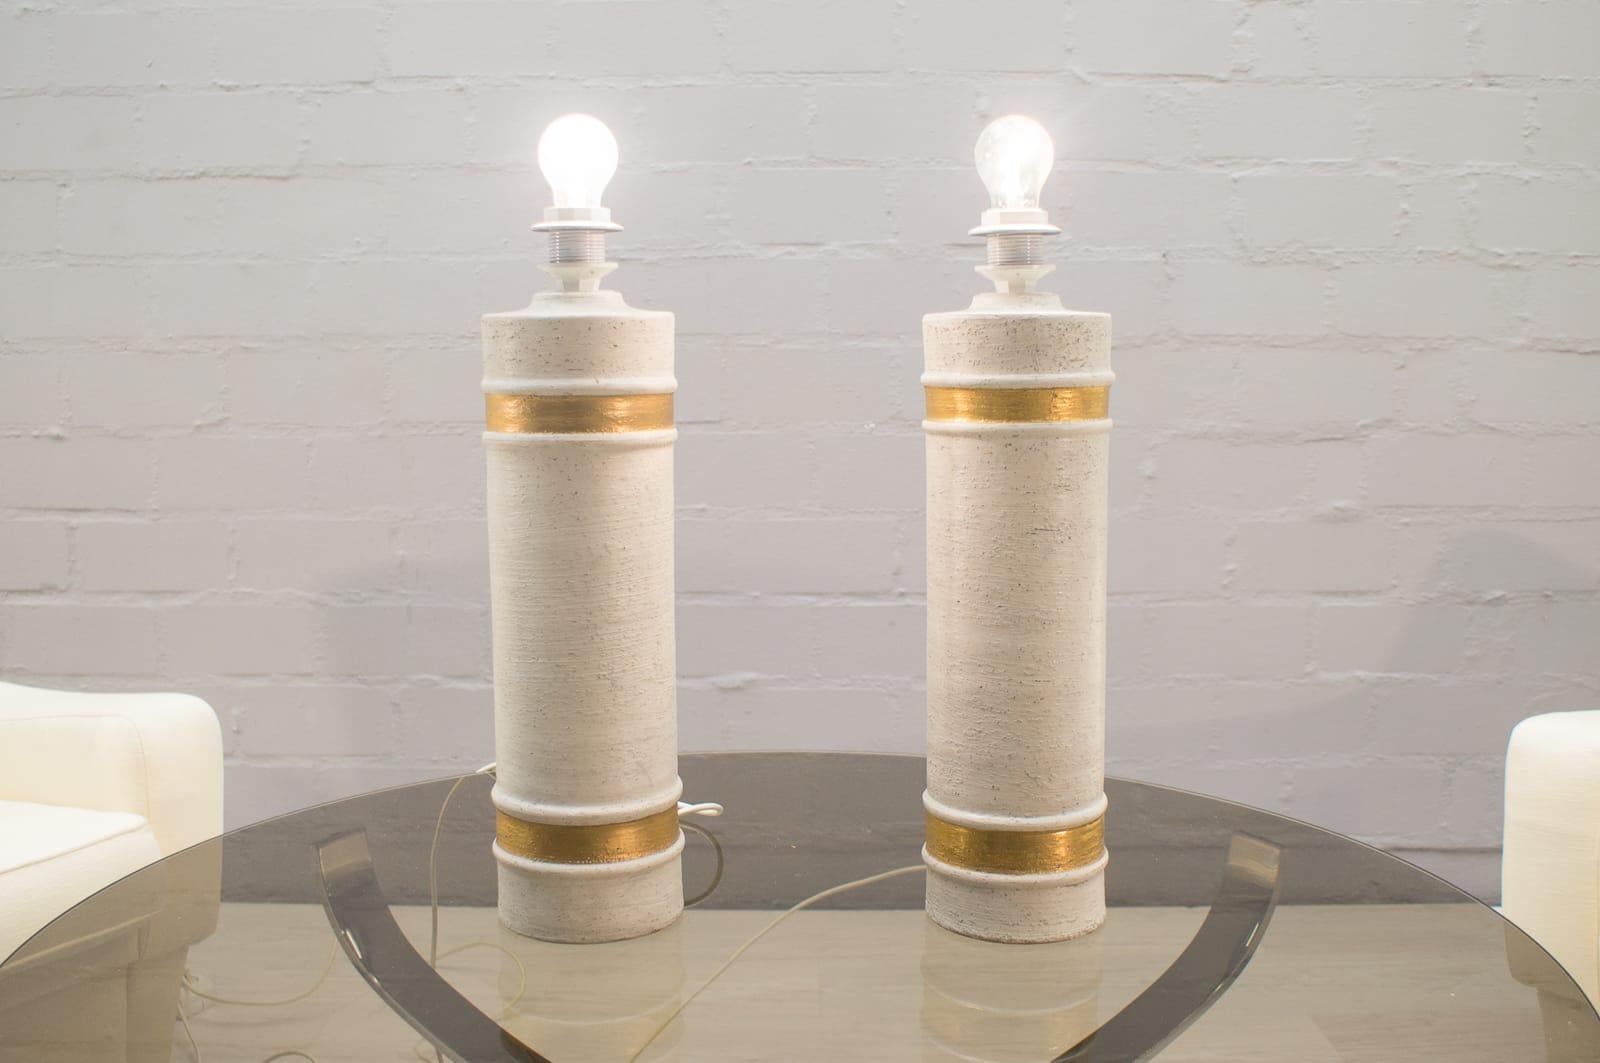 Pair of Handmade Ceramic Table Lamps by Bitossi for Bergboms Sweden, 1960s For Sale 2